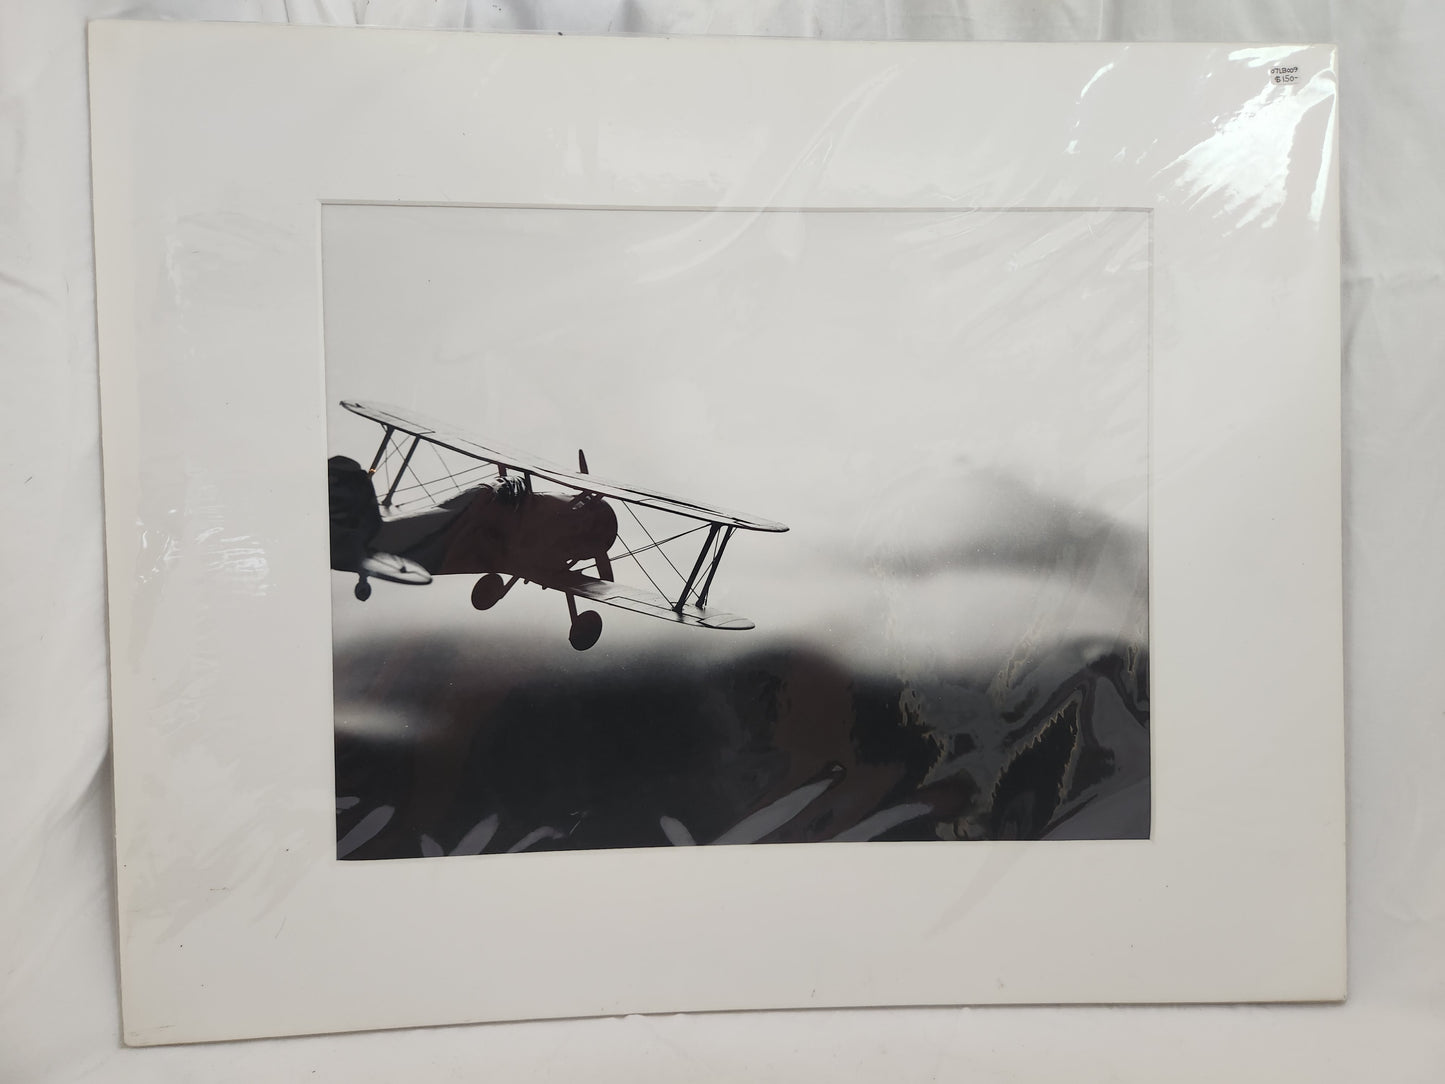 VTG - BODYSCAPES by Allan I. Teger "Airplane" Print Signed by Artist '81 - 49/250